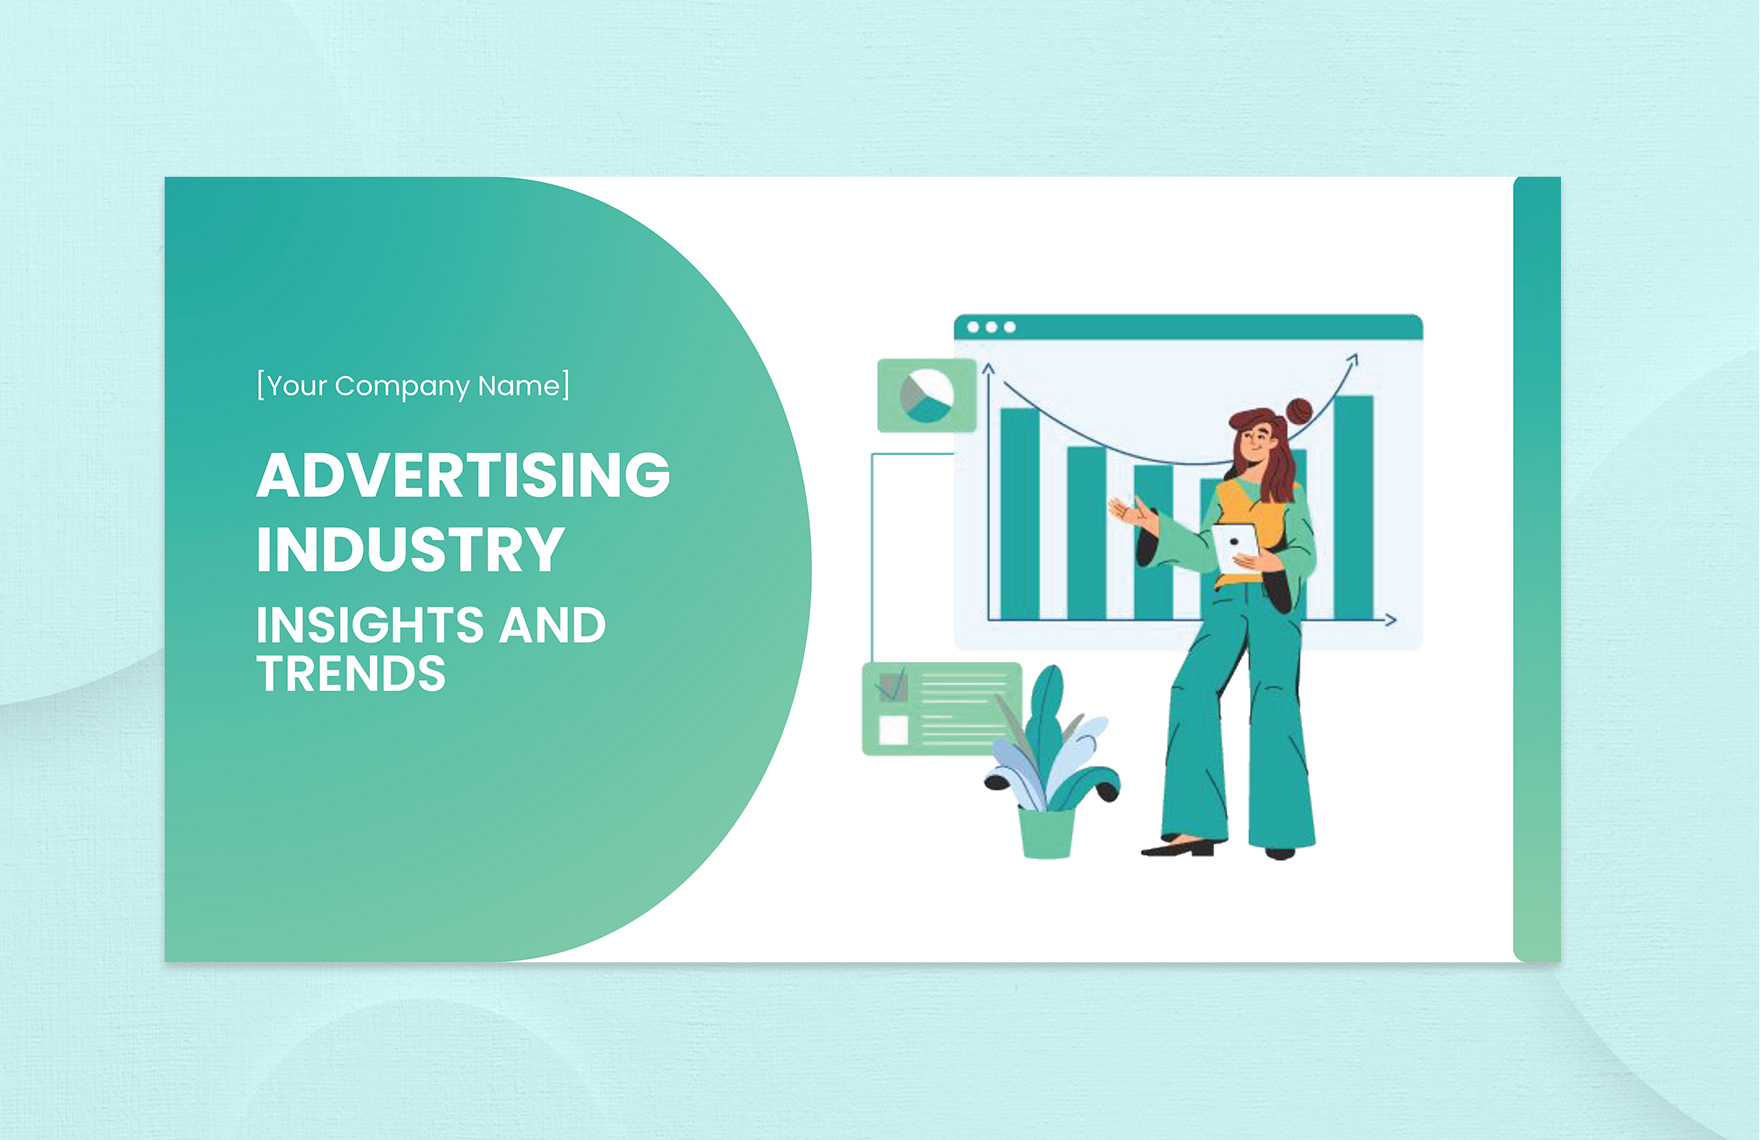 Advertising Industry Insights and Trends Presentation Template